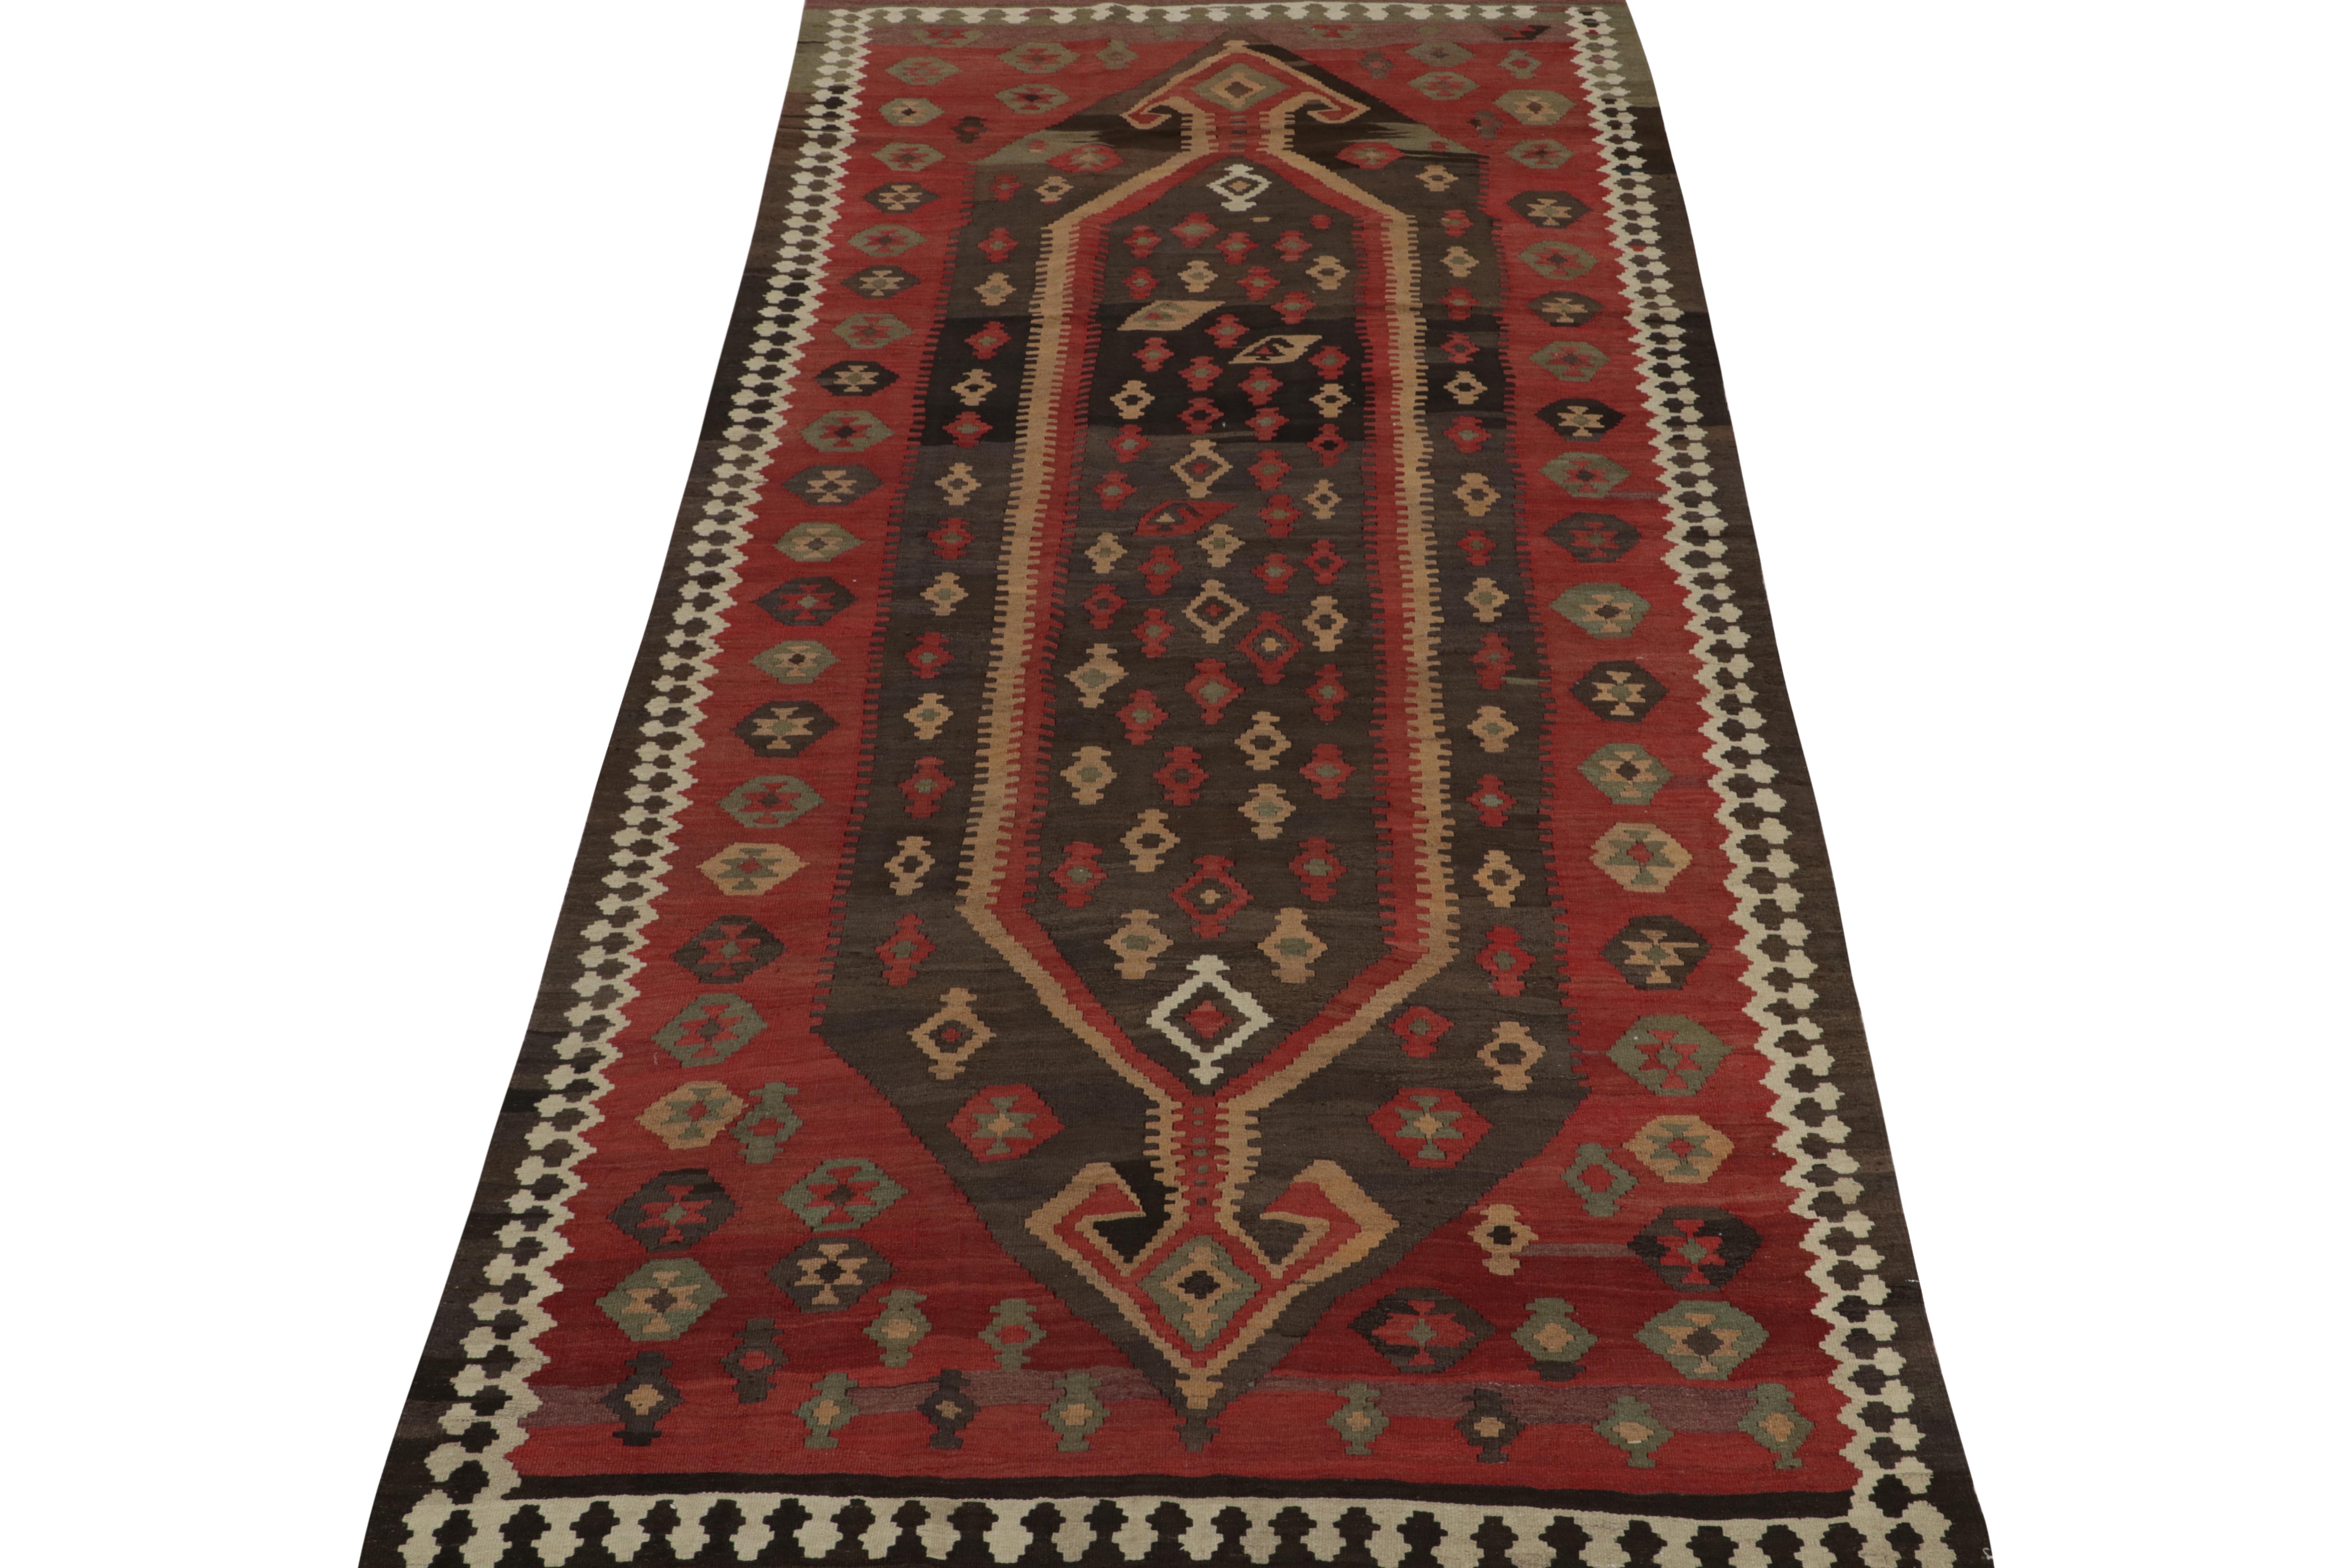 This vintage 5x11 Persian kilim is a Shahsavan rug of rare design—handwoven in wool circa 1950-1960.

Further on the Design:

This design favors rich brown and red in its medallion and geometric patterns, but also employs intriguing 
accents we